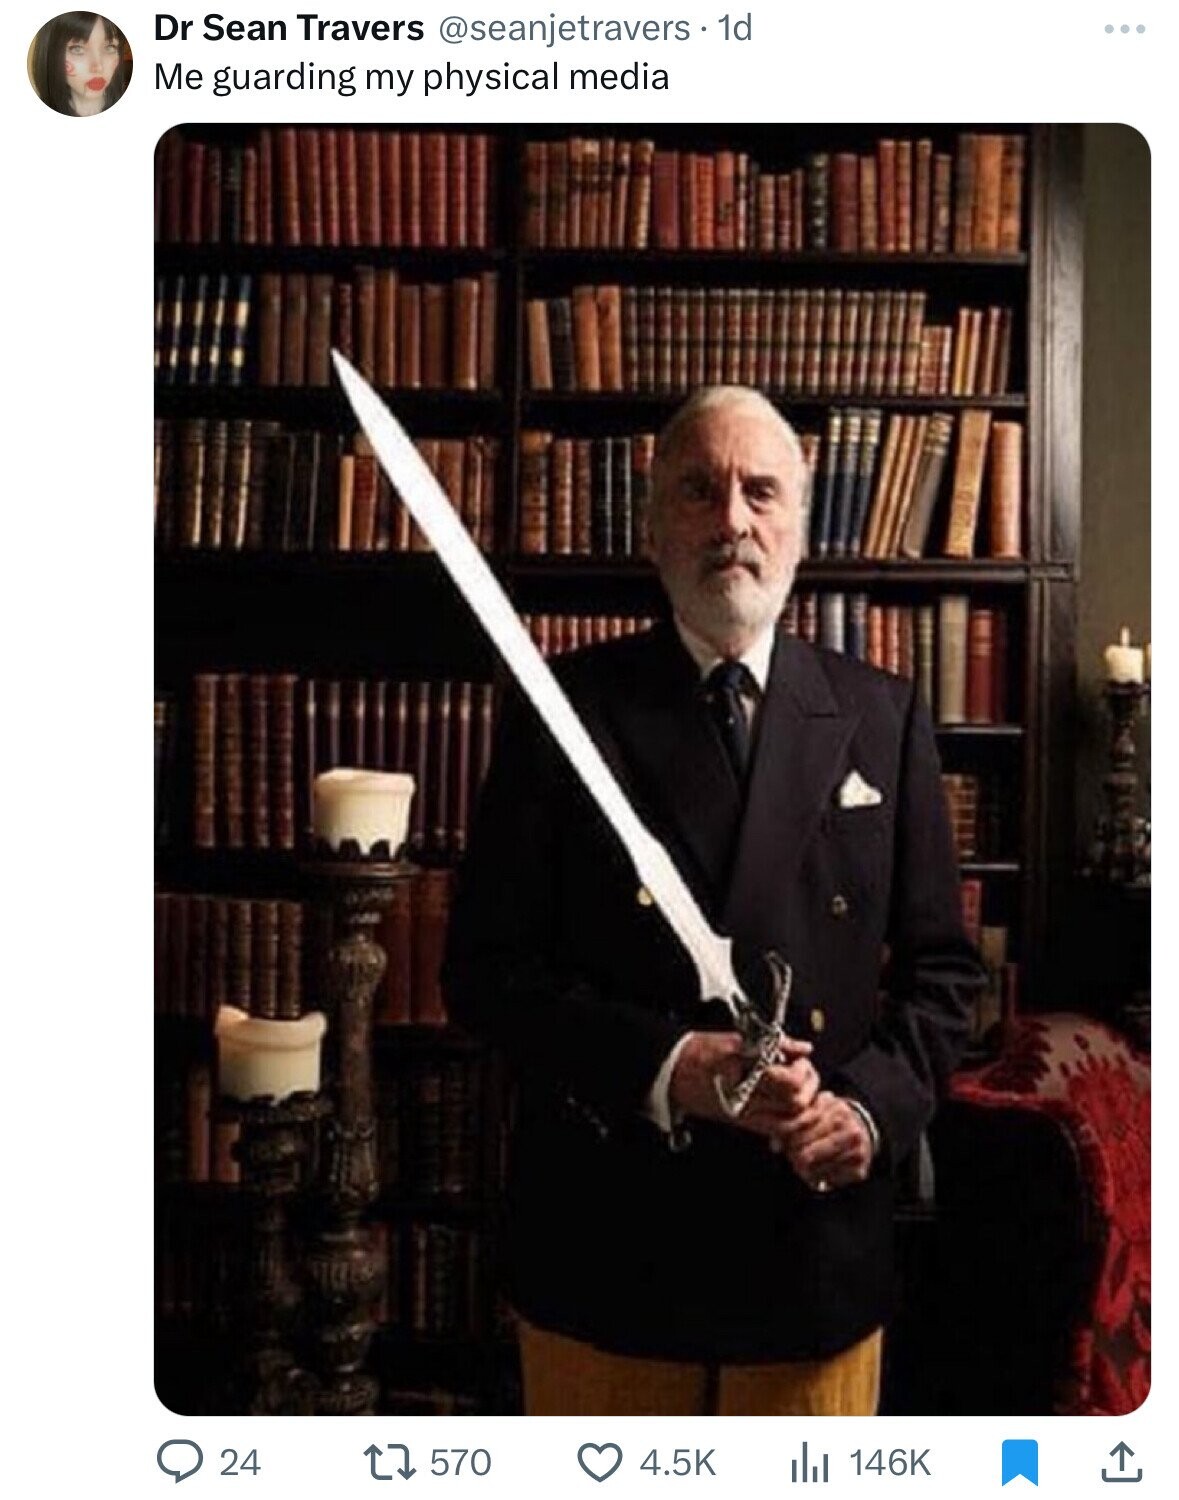 charlemagne christopher lee - Dr Sean Travers . 1d Me guarding my physical media ... Q24 17570 Ill